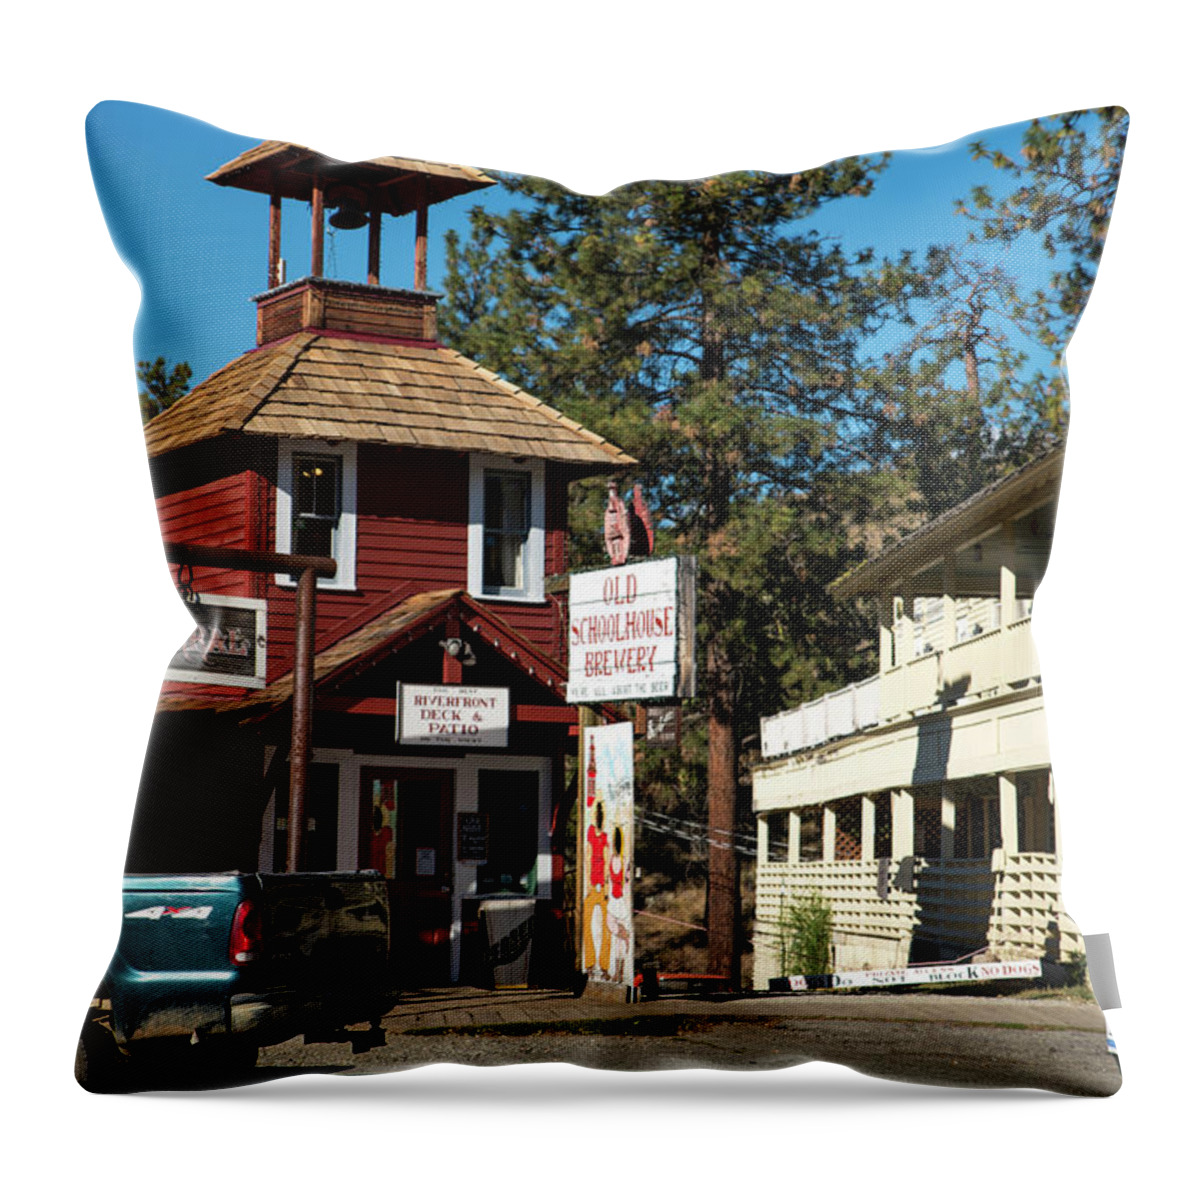 Brewery Throw Pillow featuring the photograph Schoolhouse Brewery by Tom Cochran